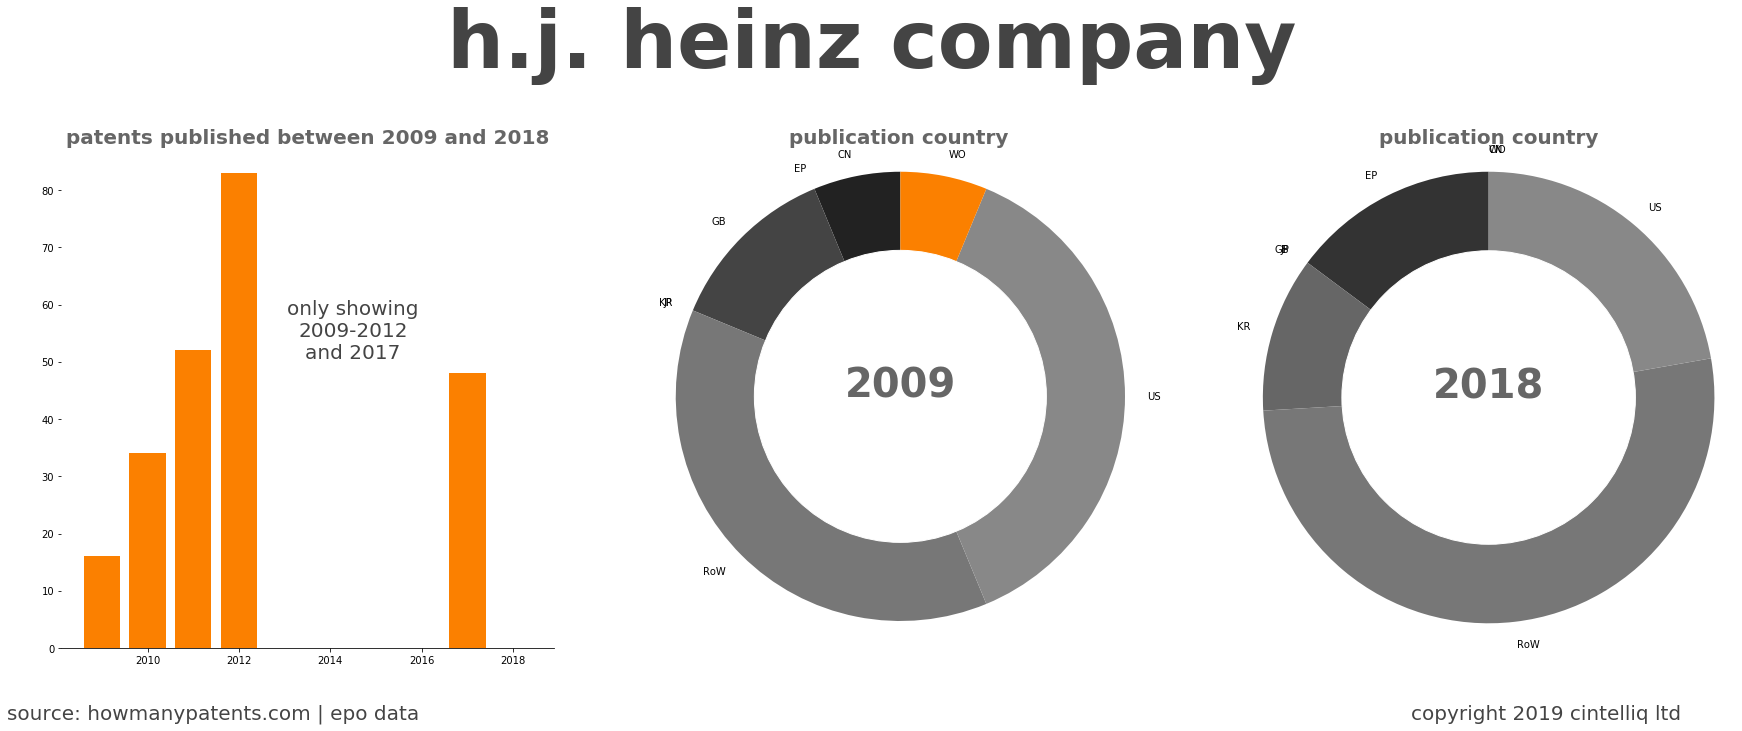 summary of patents for H.J. Heinz Company